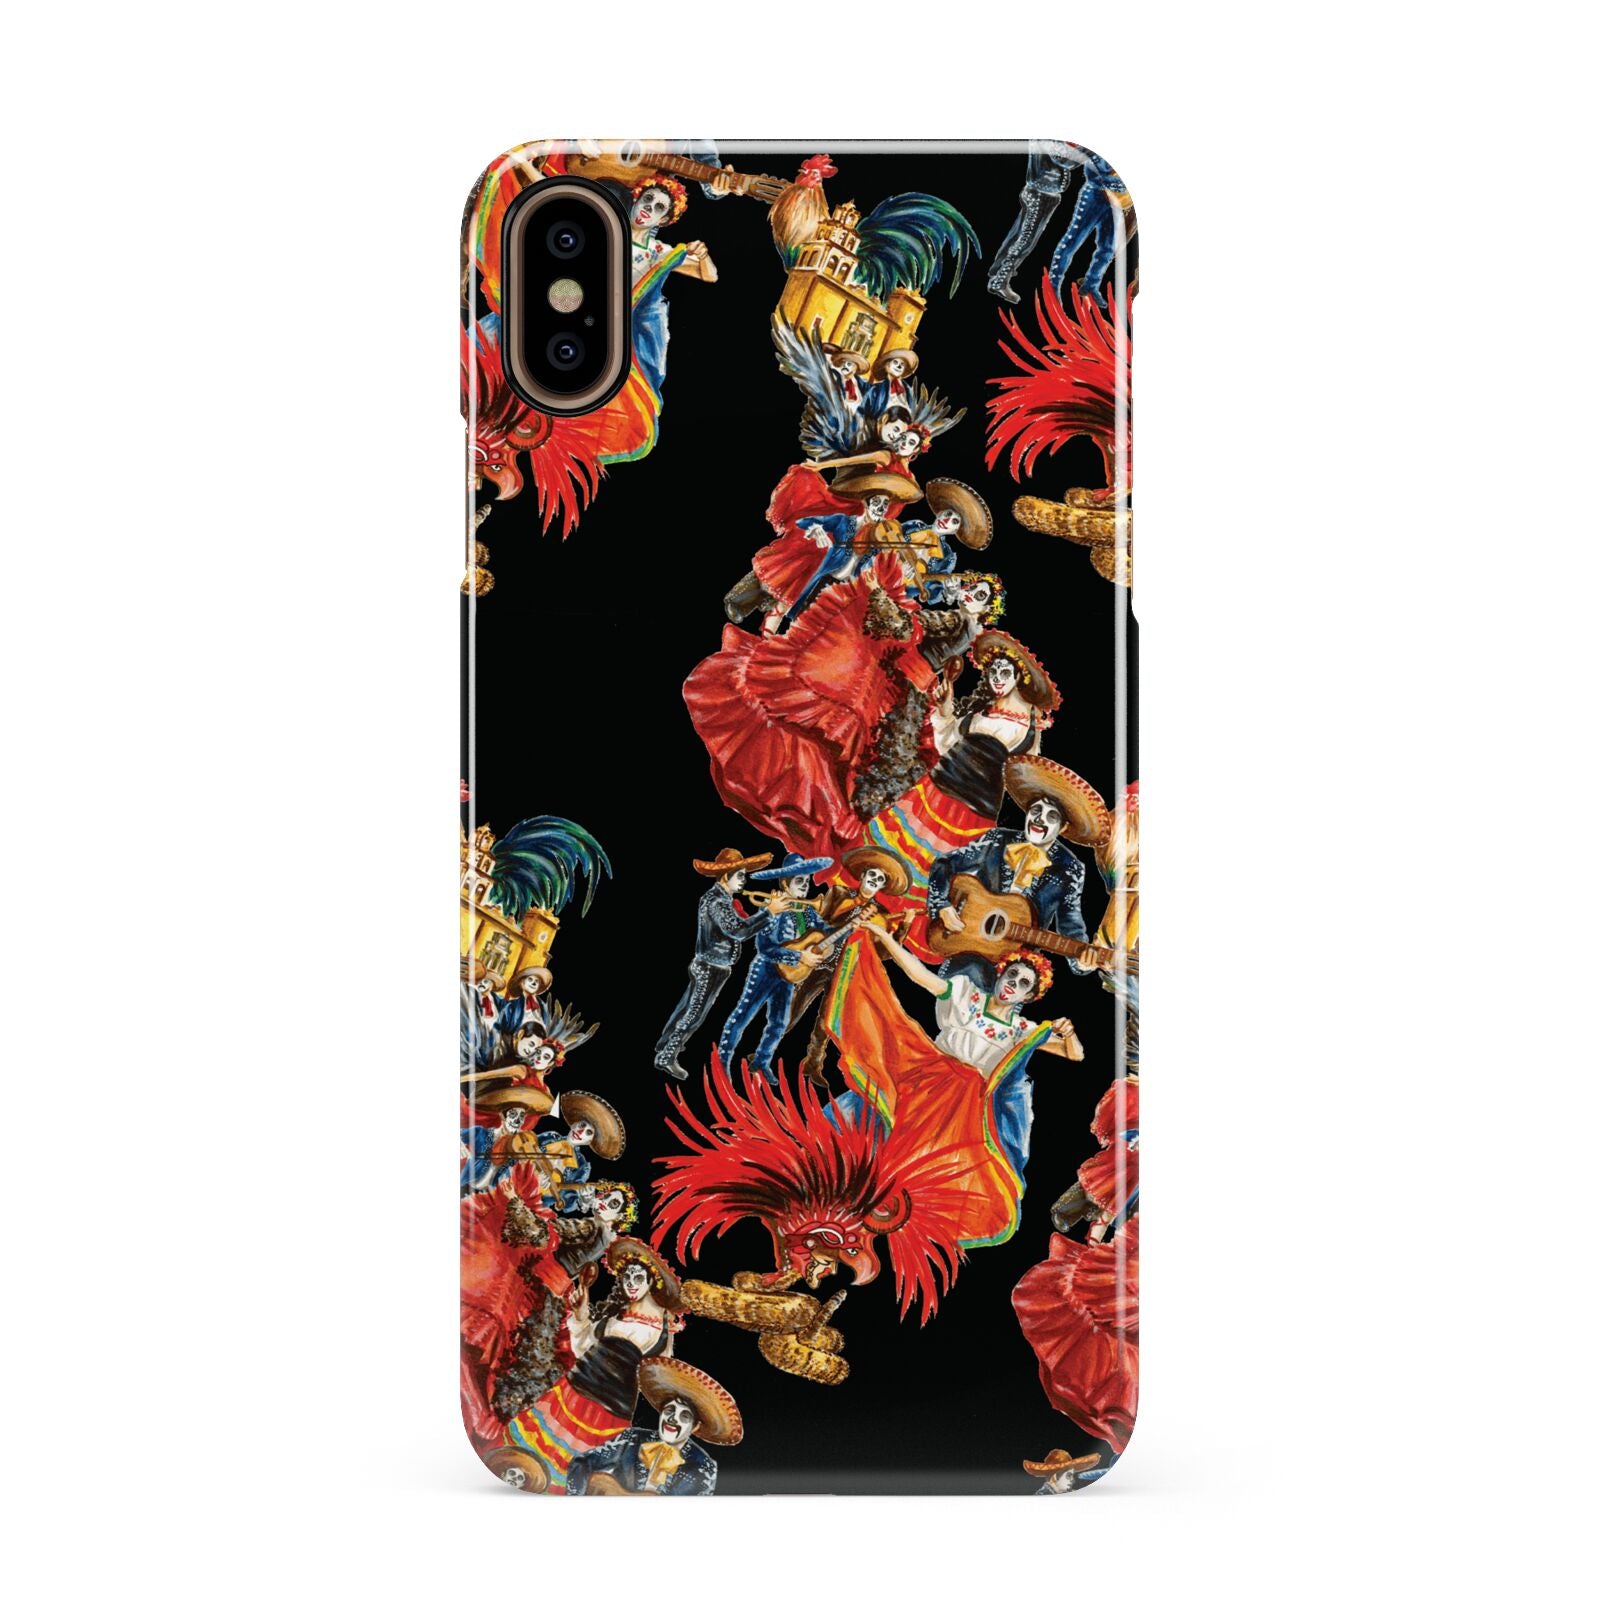 Day of the Dead Festival Apple iPhone Xs Max 3D Snap Case